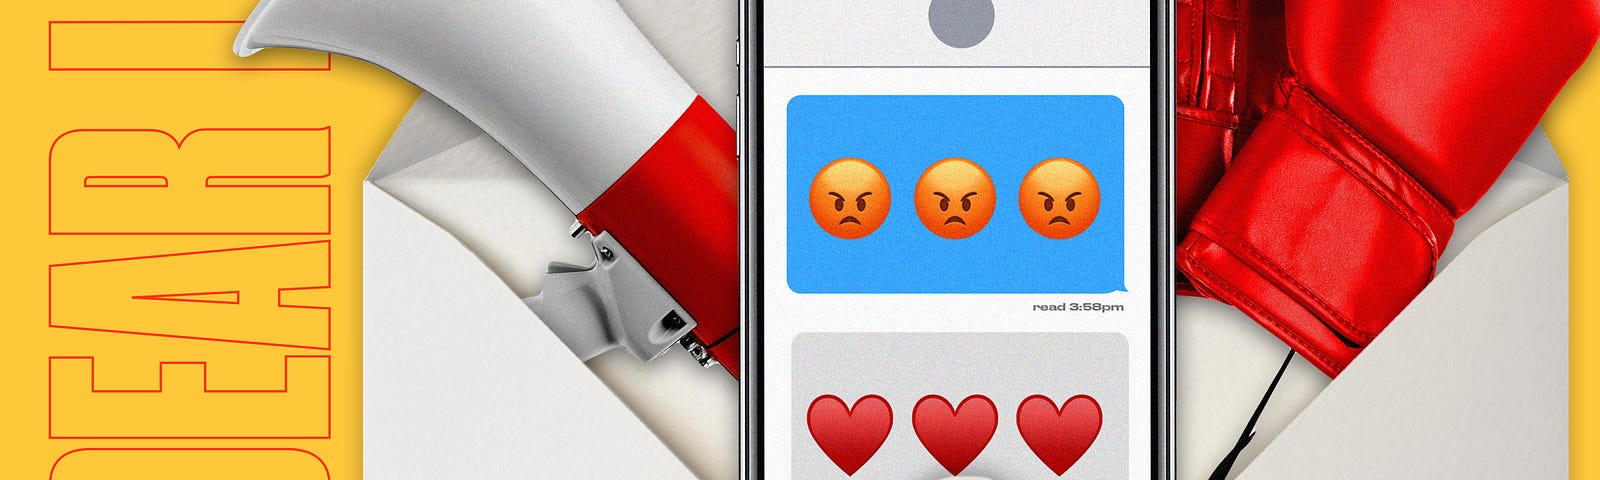 Photo Illustration of phone with angry emoji and heart texts. Boxing gloves in the background.